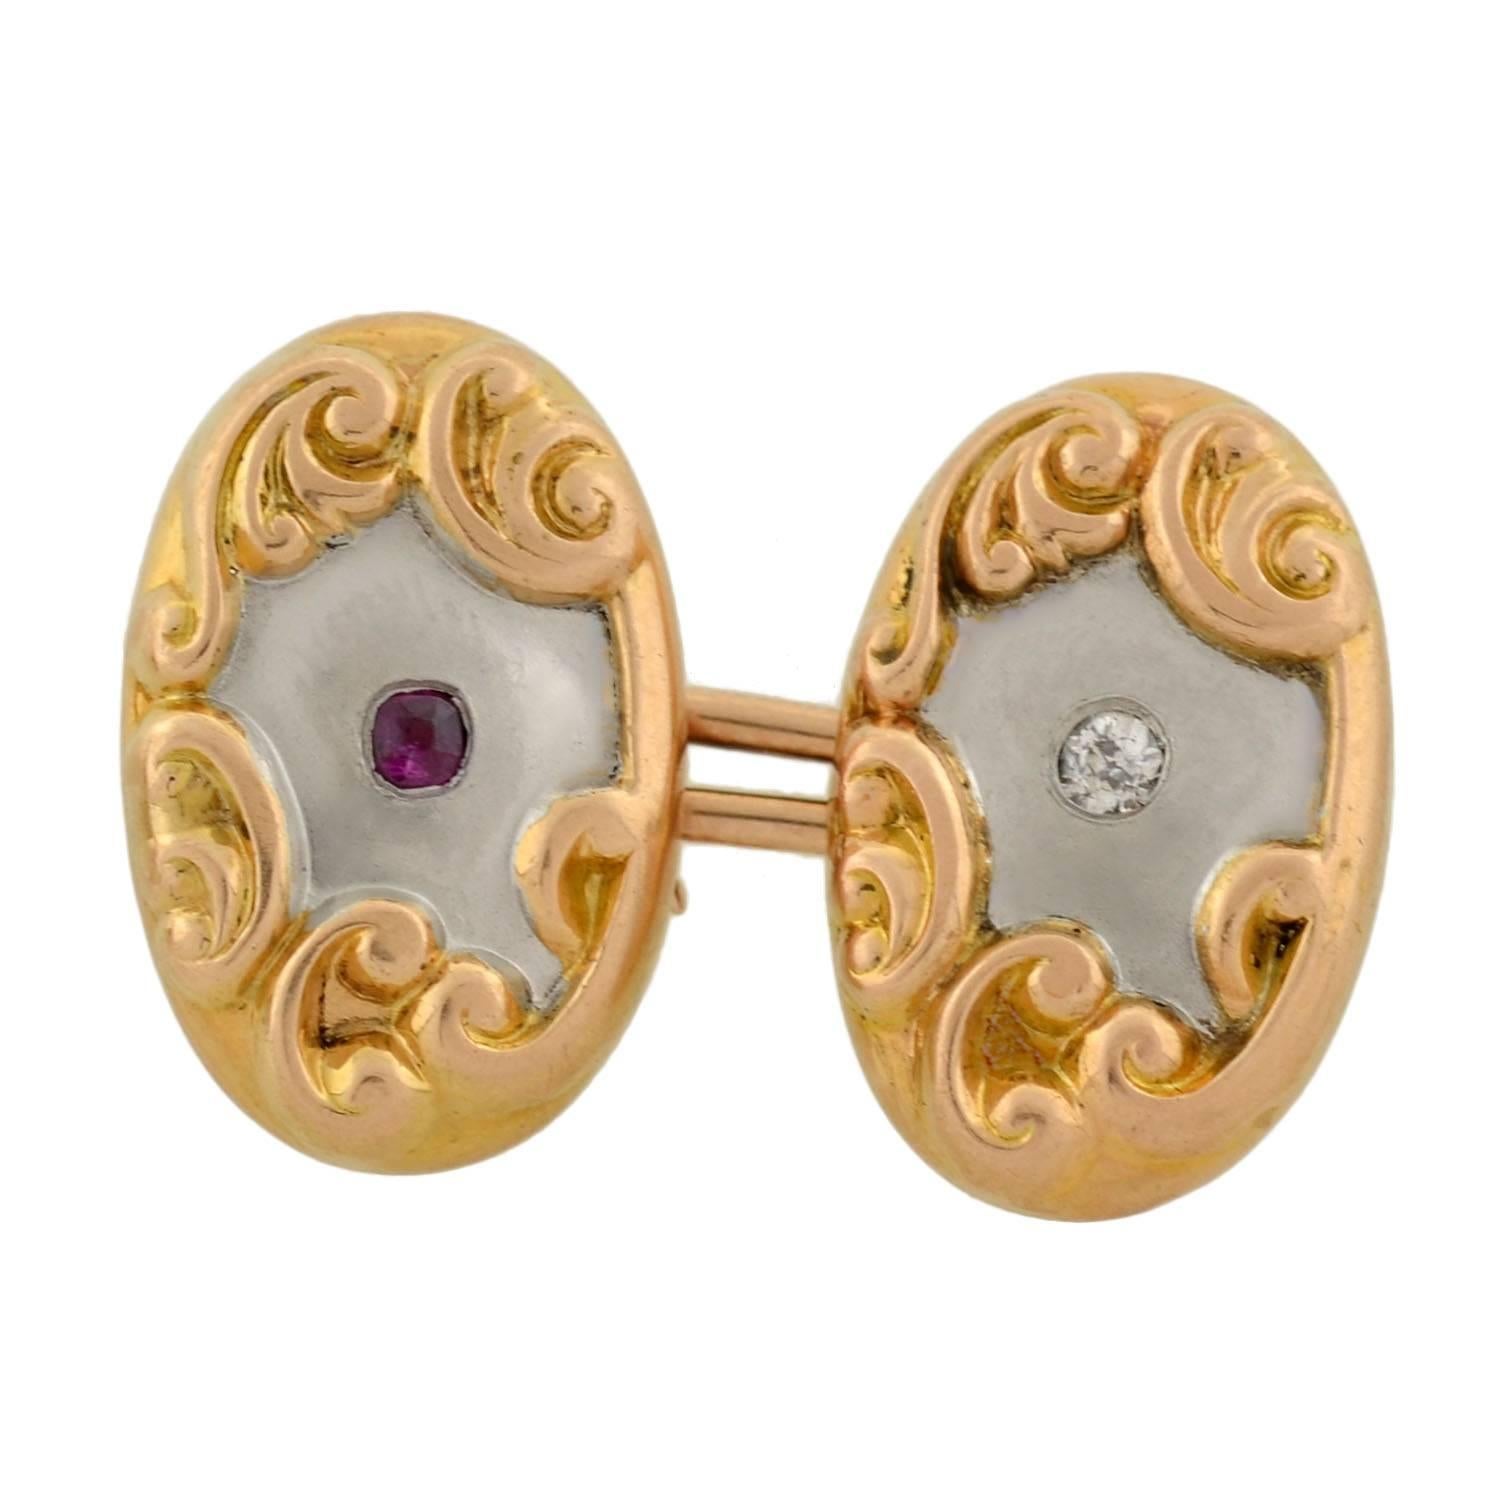 A beautiful pair of mixed metals cufflinks from the Edwardian (ca1910) era! Made of platinum-topped 14kt yellow gold, these double-sided cufflinks have a lovely two-tone design with gemstone accents. Each cufflink face has a smooth platinum center,